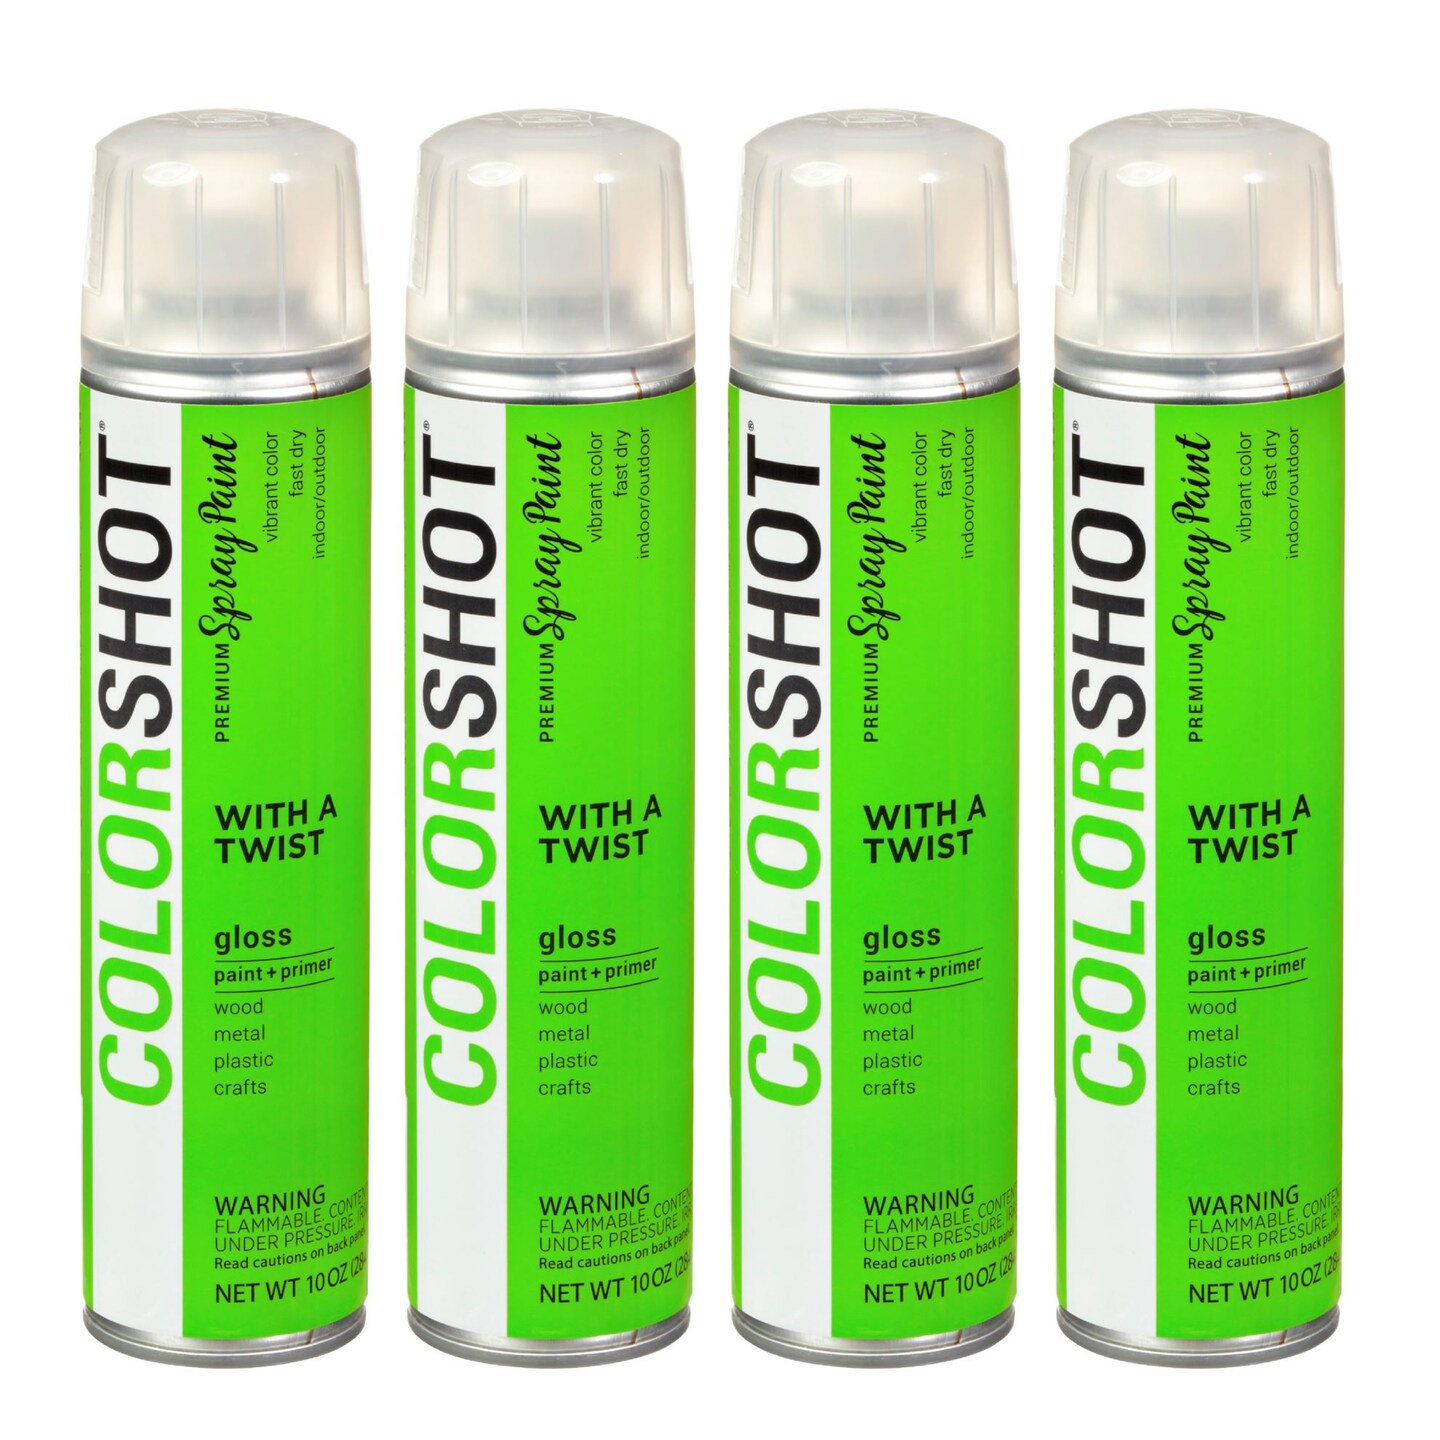 COLORSHOT Gloss Spray Paint With a Twist (Lime) 10 oz. 4 Pack